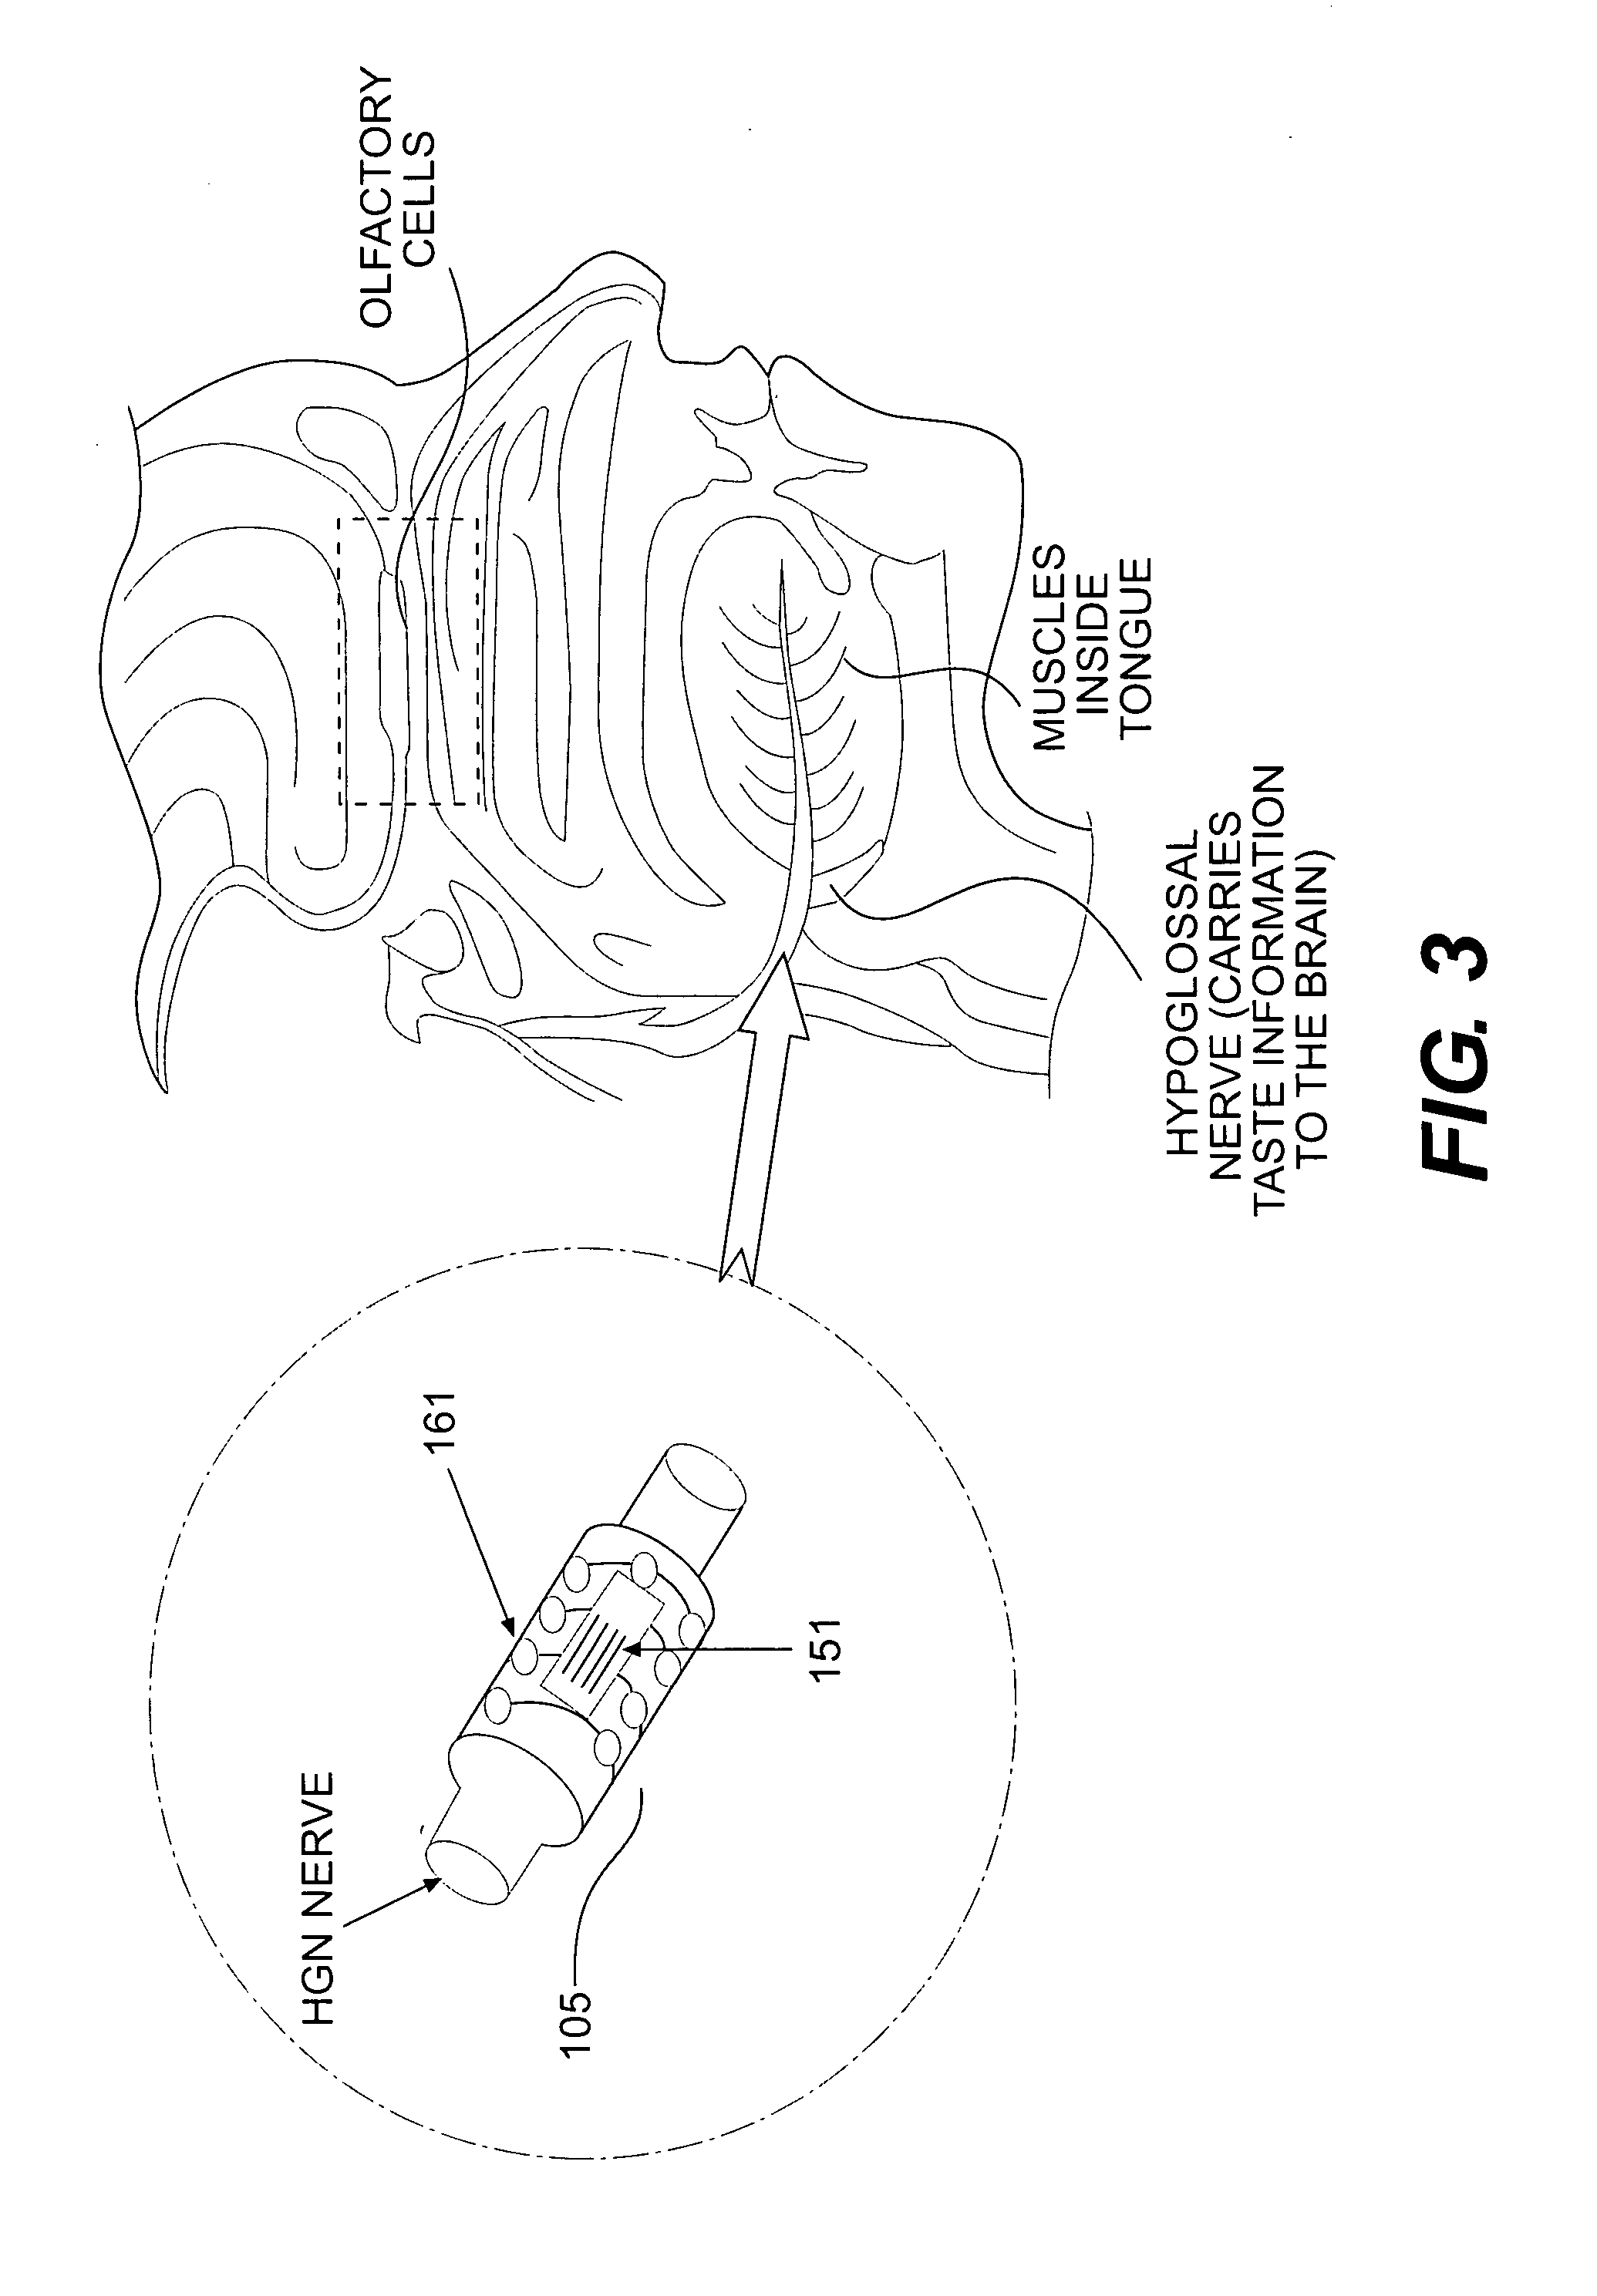 RFID-based apparatus, system, and method for therapeutic treatment of obstructive sleep apnea